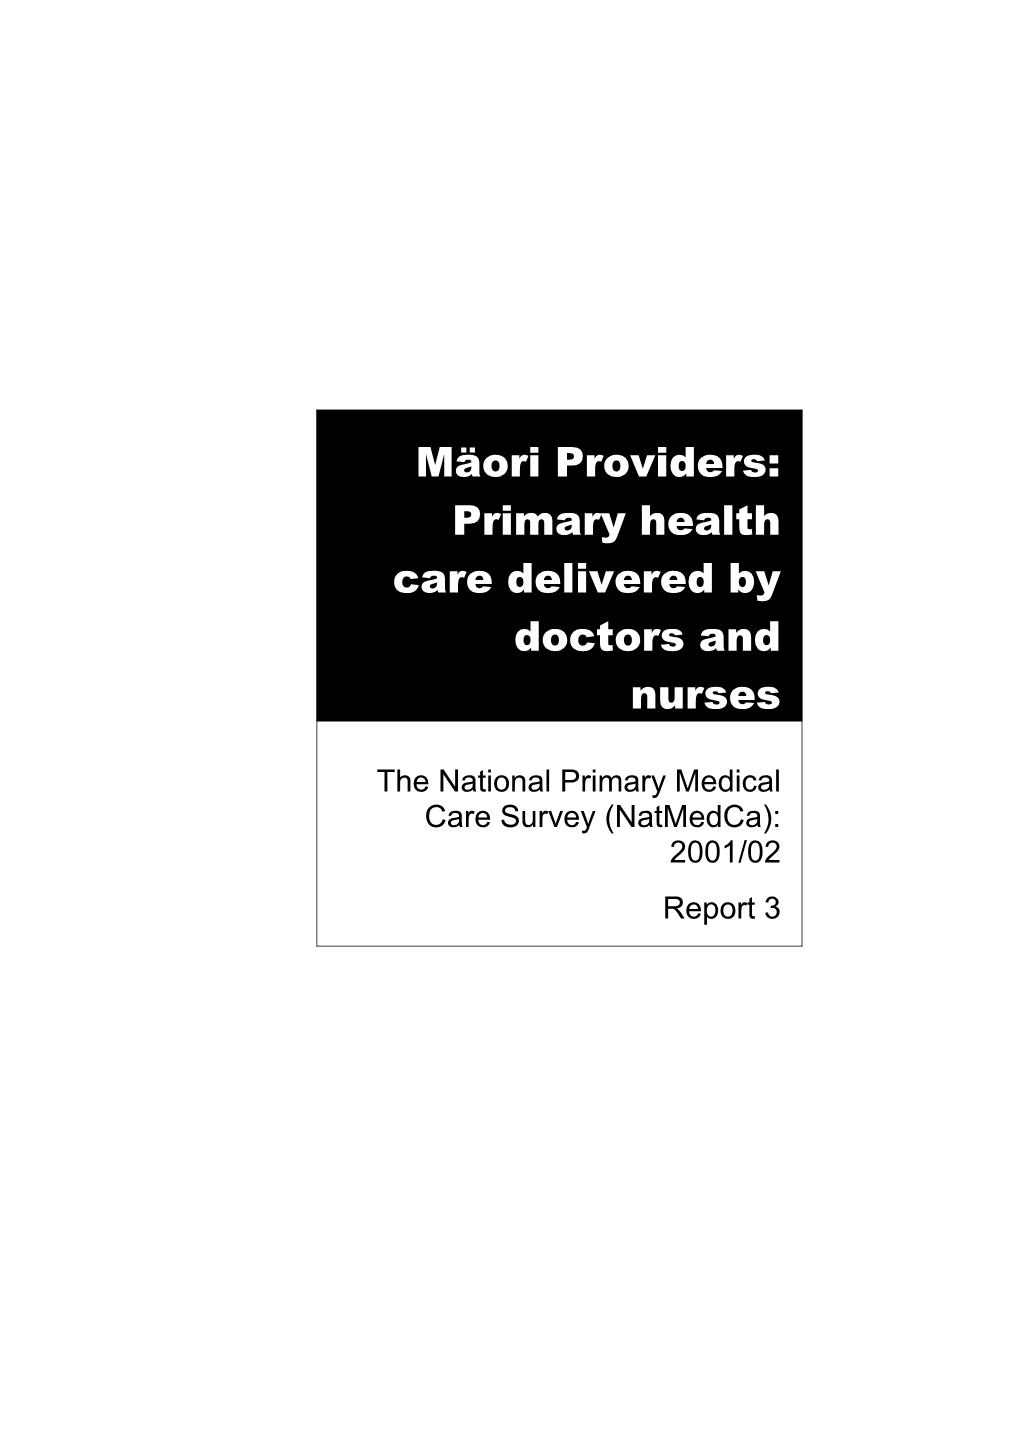 Maori Providers: Primary Health Care Delivered by Doctors and Nurses